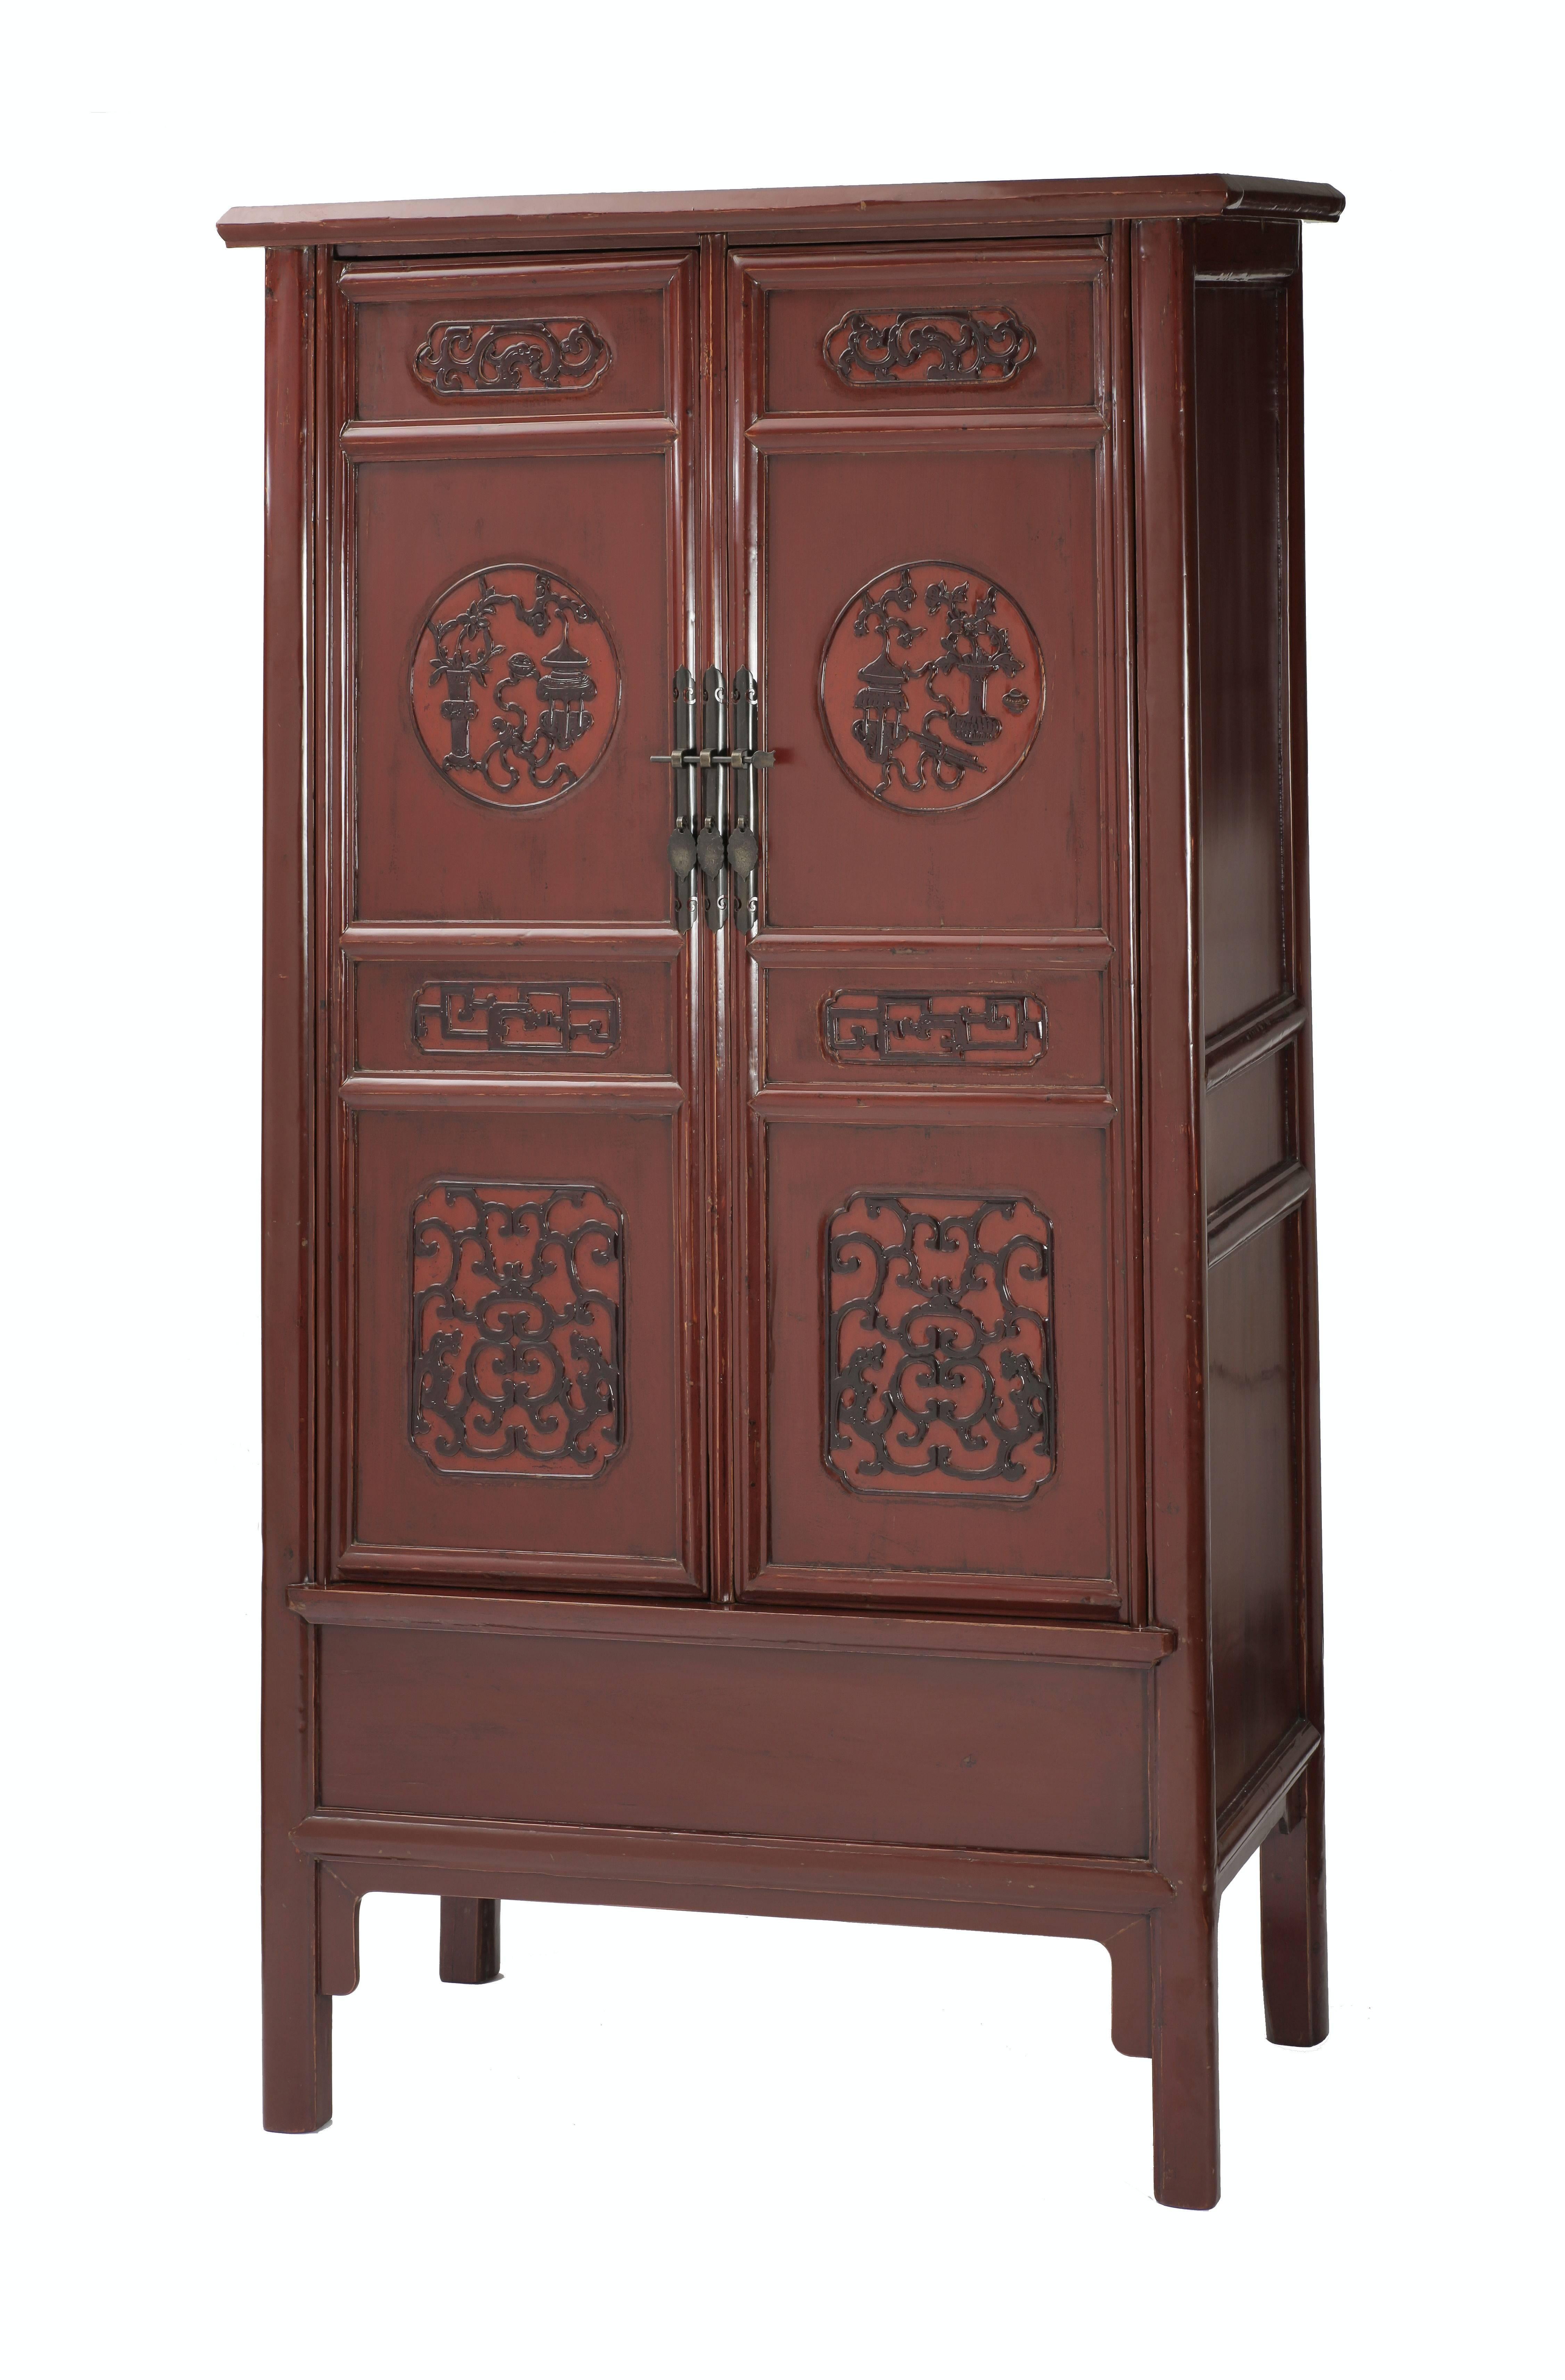 19th Century Antique Red Lacquer Tapered Cabinet, Relief-Carved Roundels, Chinoiserie